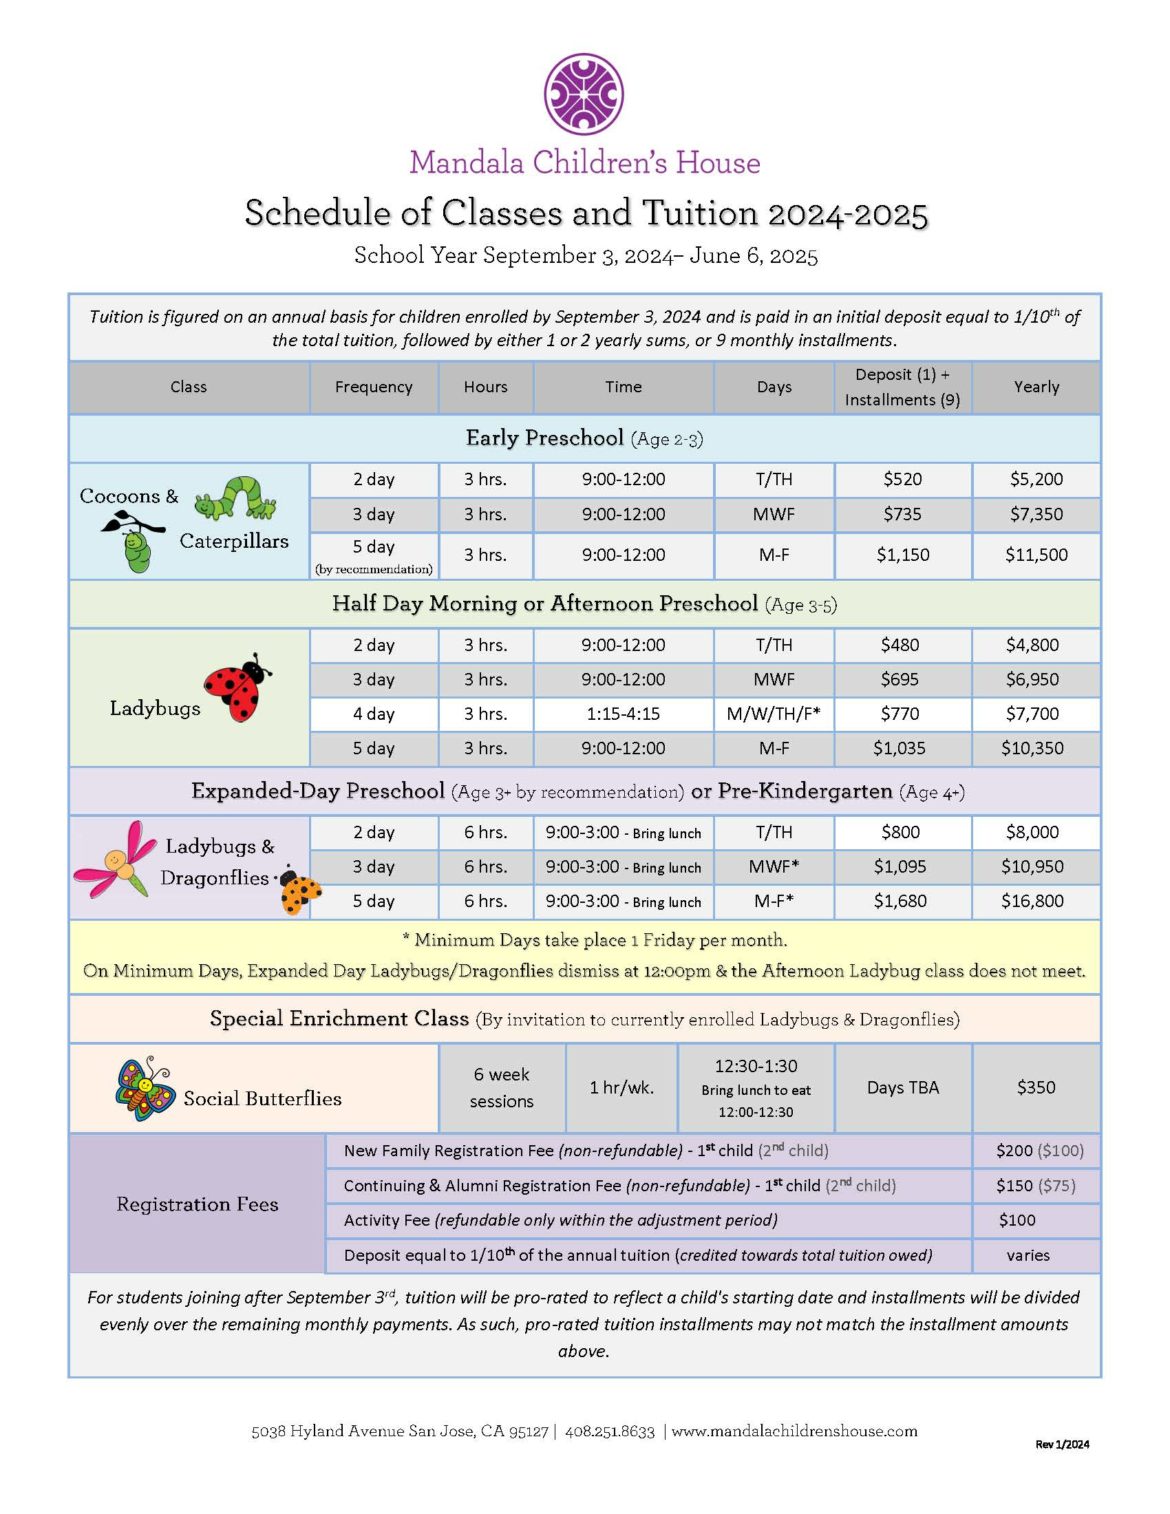 Schedule-of-Classes-Tuition-2024-25.jpg